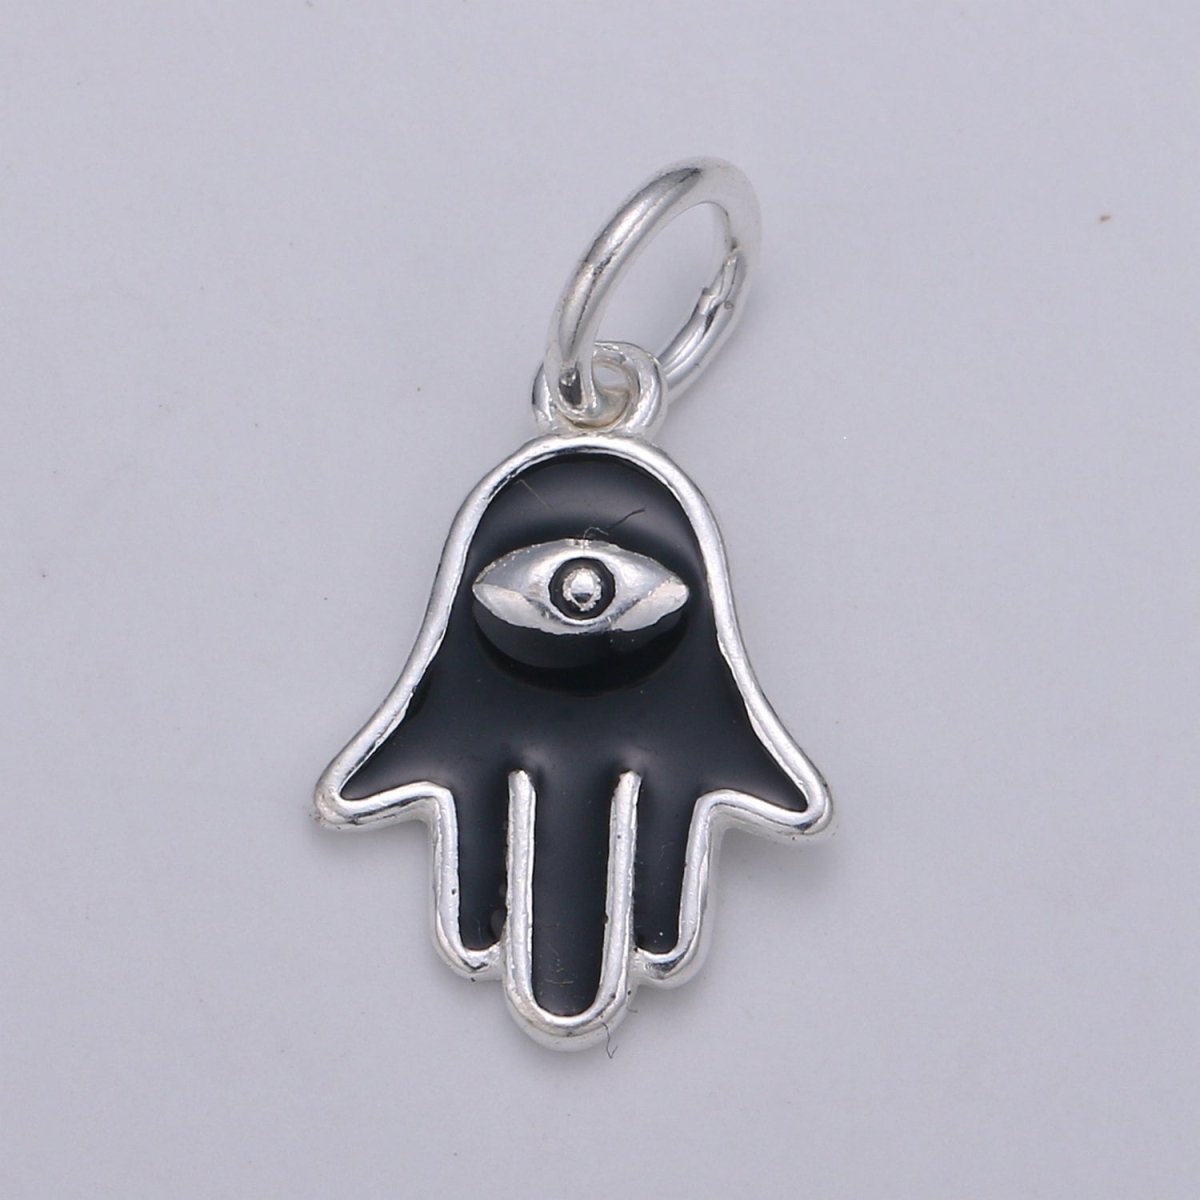 Tiny Silver Hamsa Hand Charm - 925 sterling silver, small fatima Amulet lucky protection hand pendant wholesale supply for Bracelet Necklace SL-031 SL-032 - DLUXCA